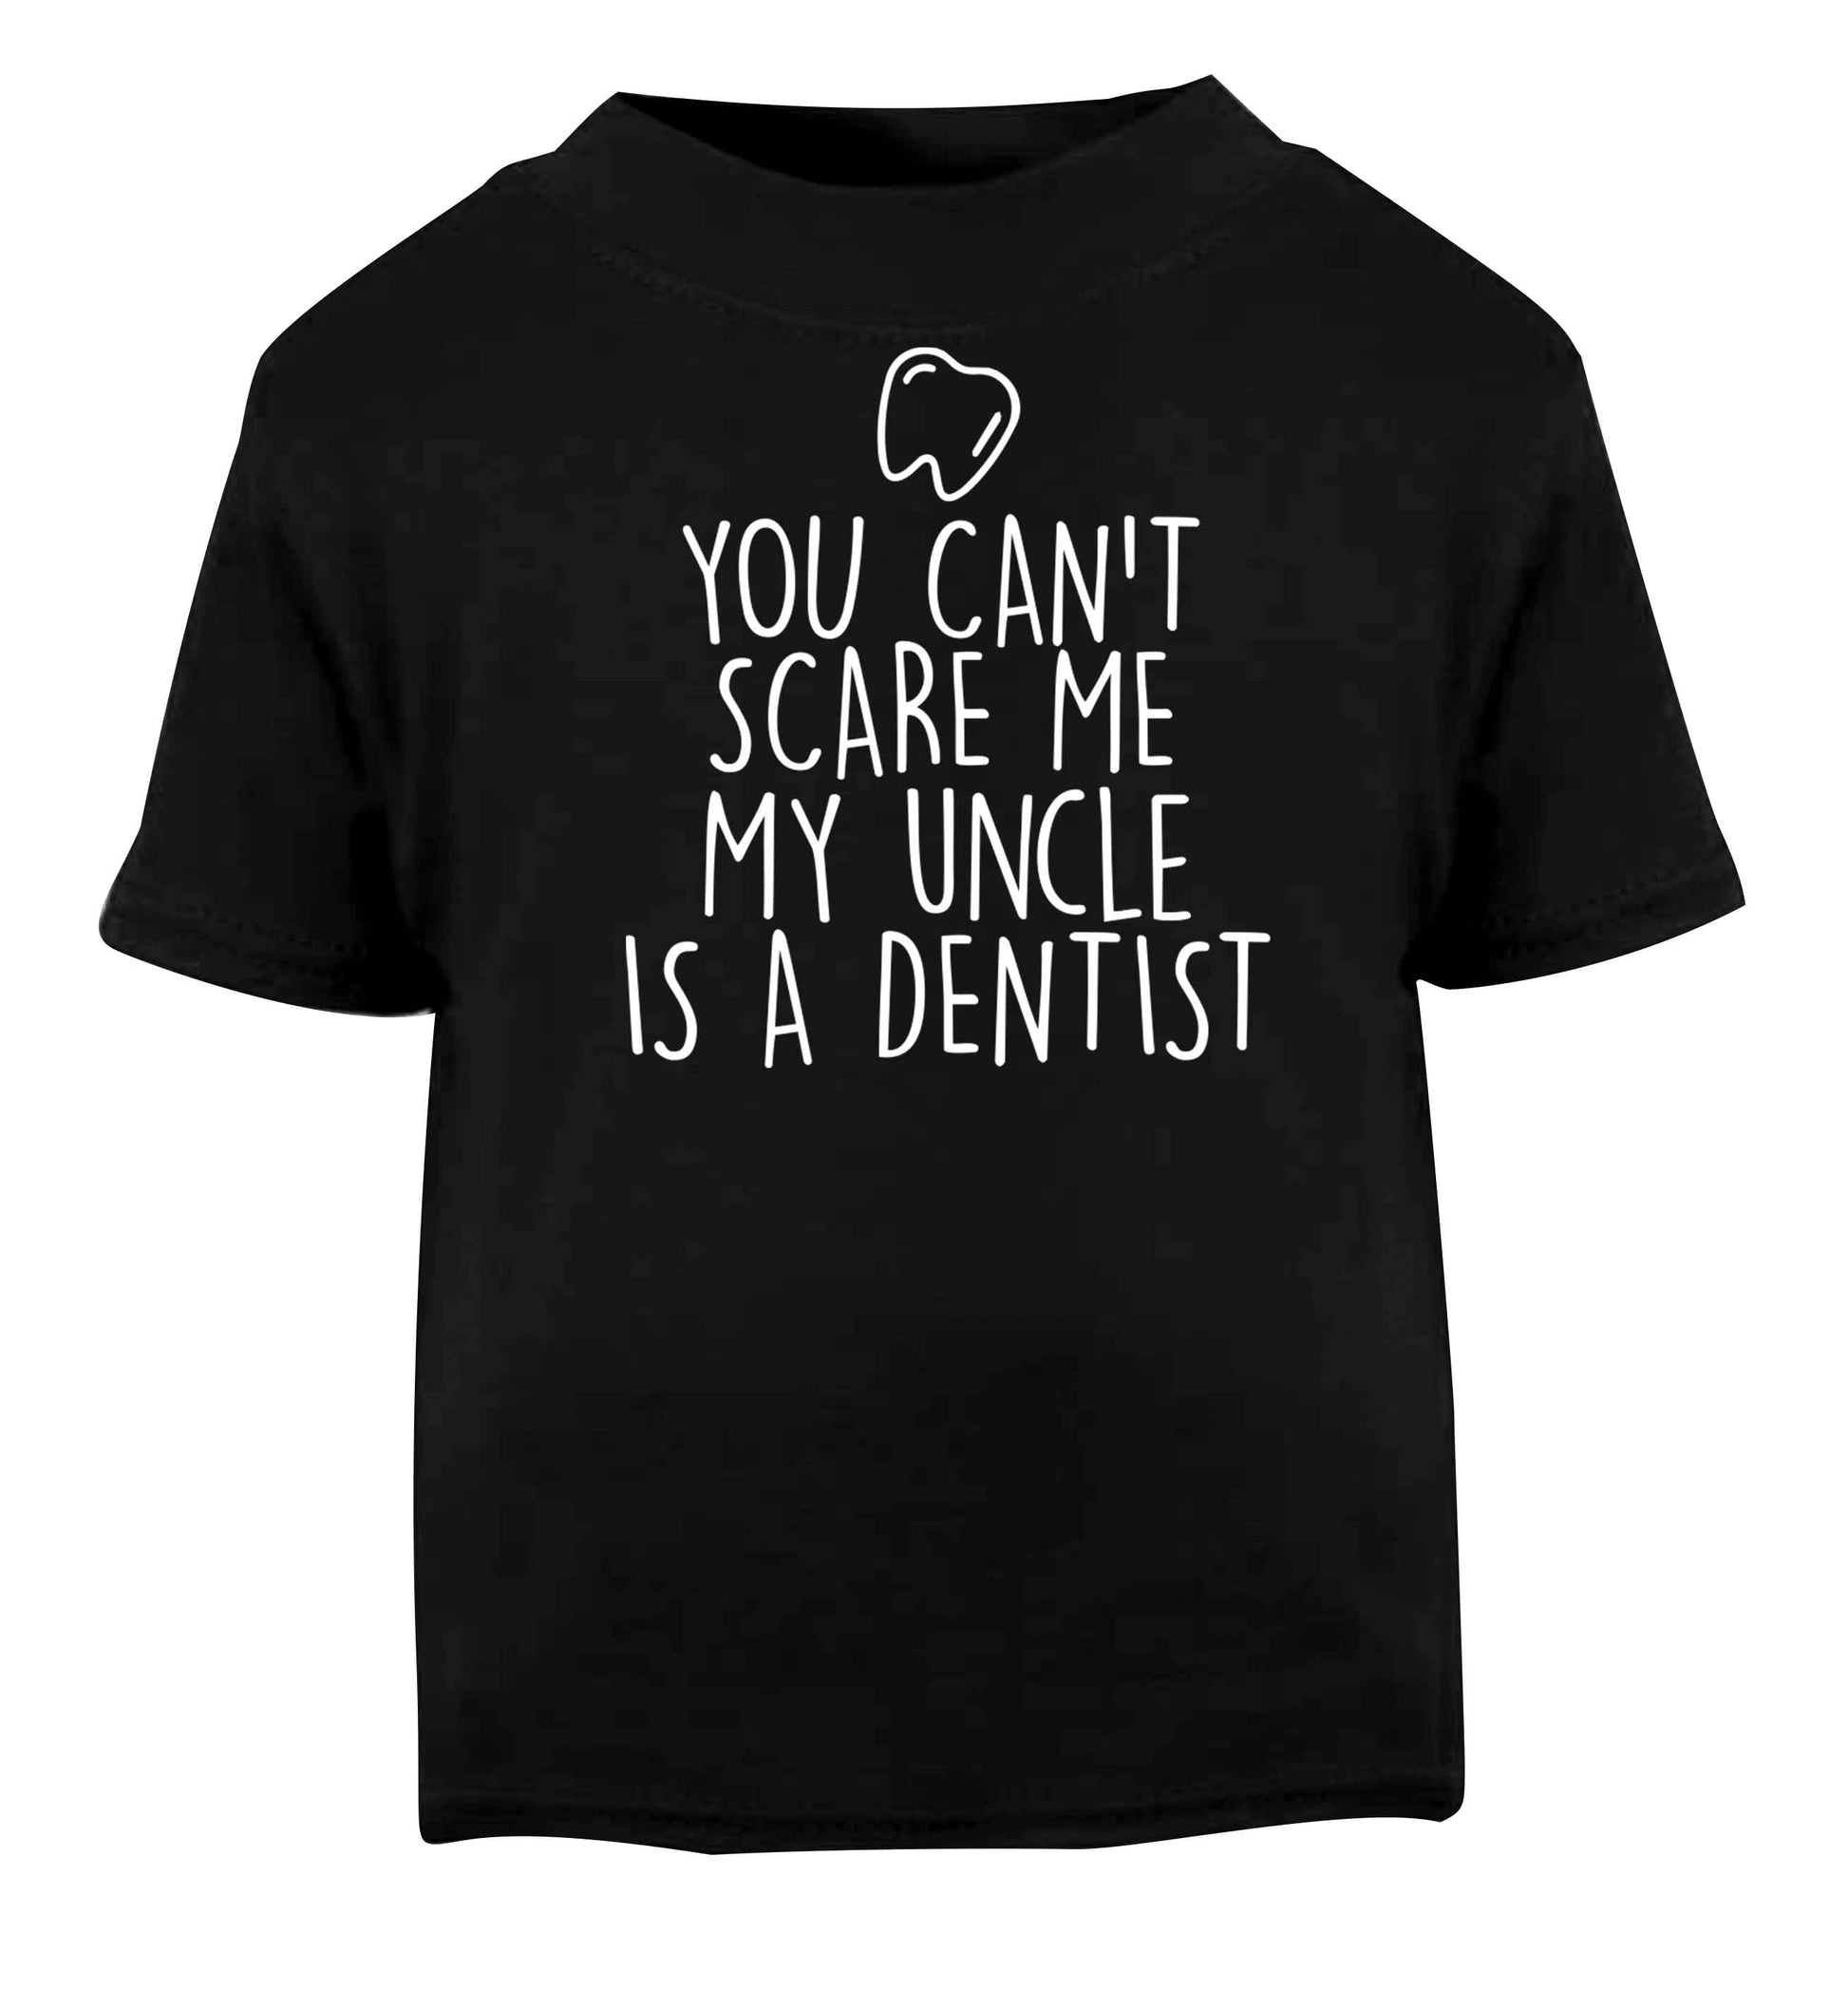 You can't scare me my uncle is a dentist Black baby toddler Tshirt 2 years